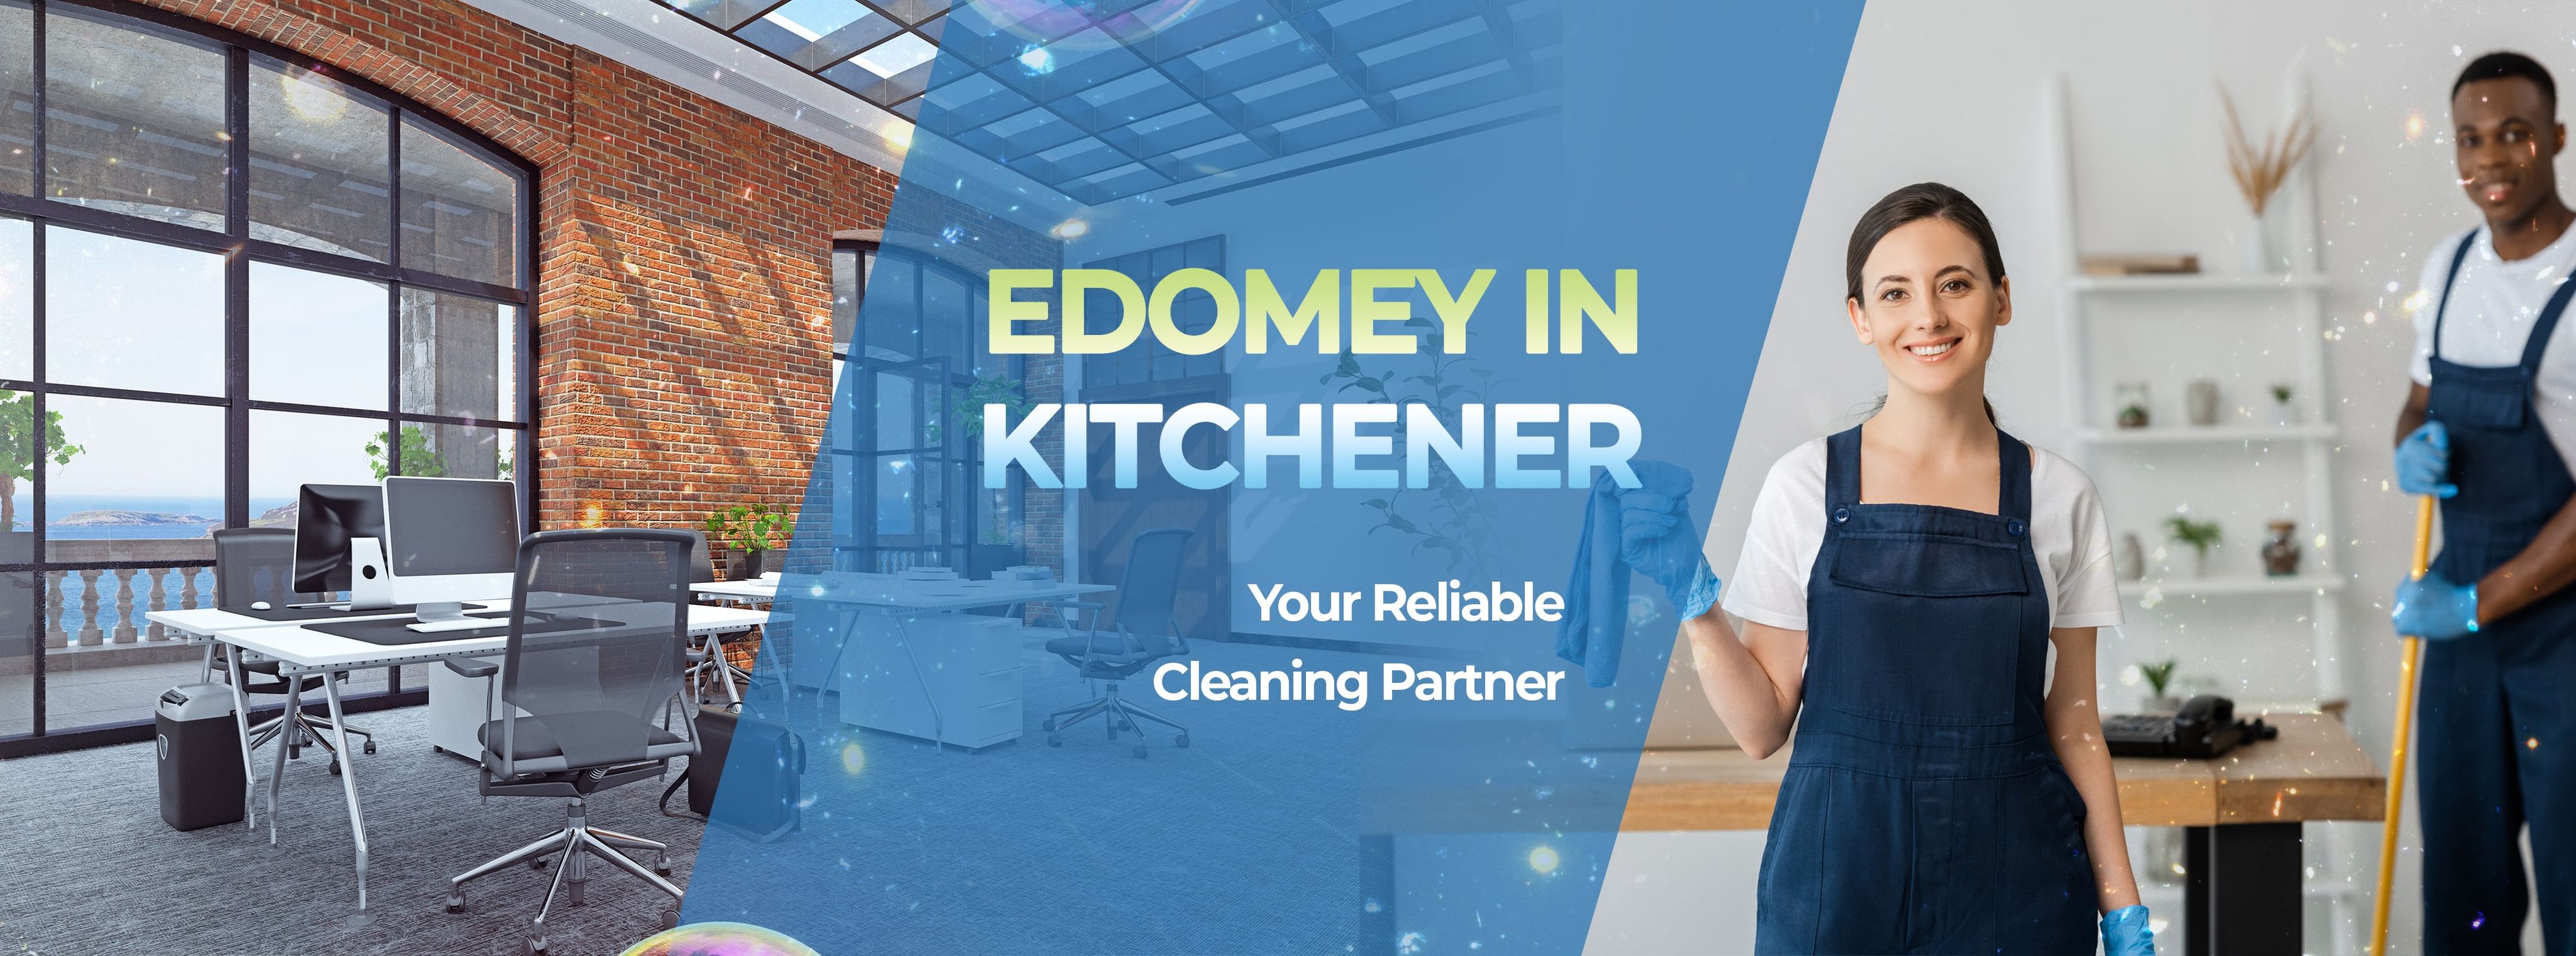 Commercial Cleaning Services in Kitchener, ON for offices and stores